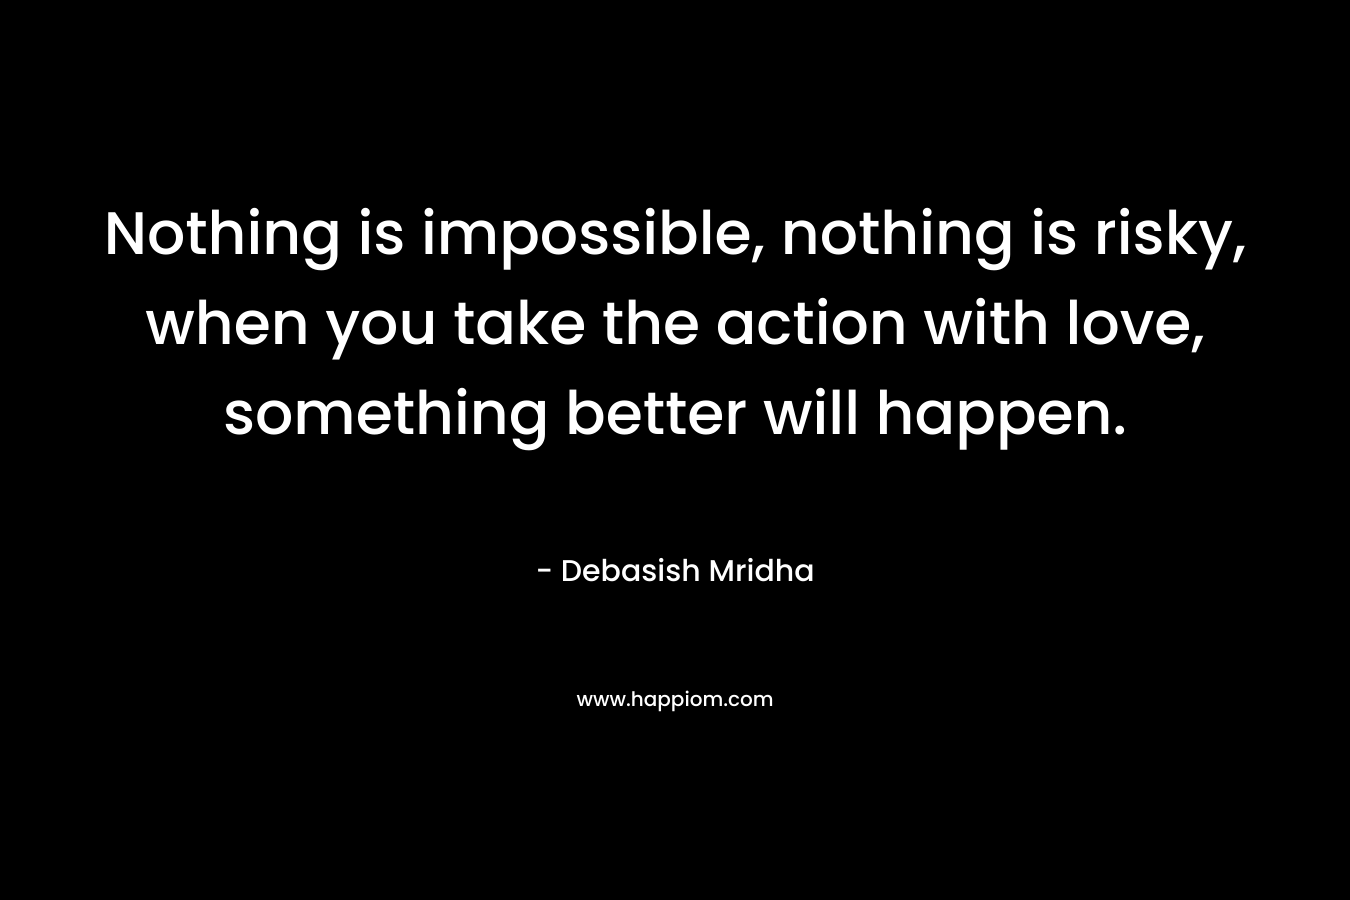 Nothing is impossible, nothing is risky, when you take the action with love, something better will happen. – Debasish Mridha